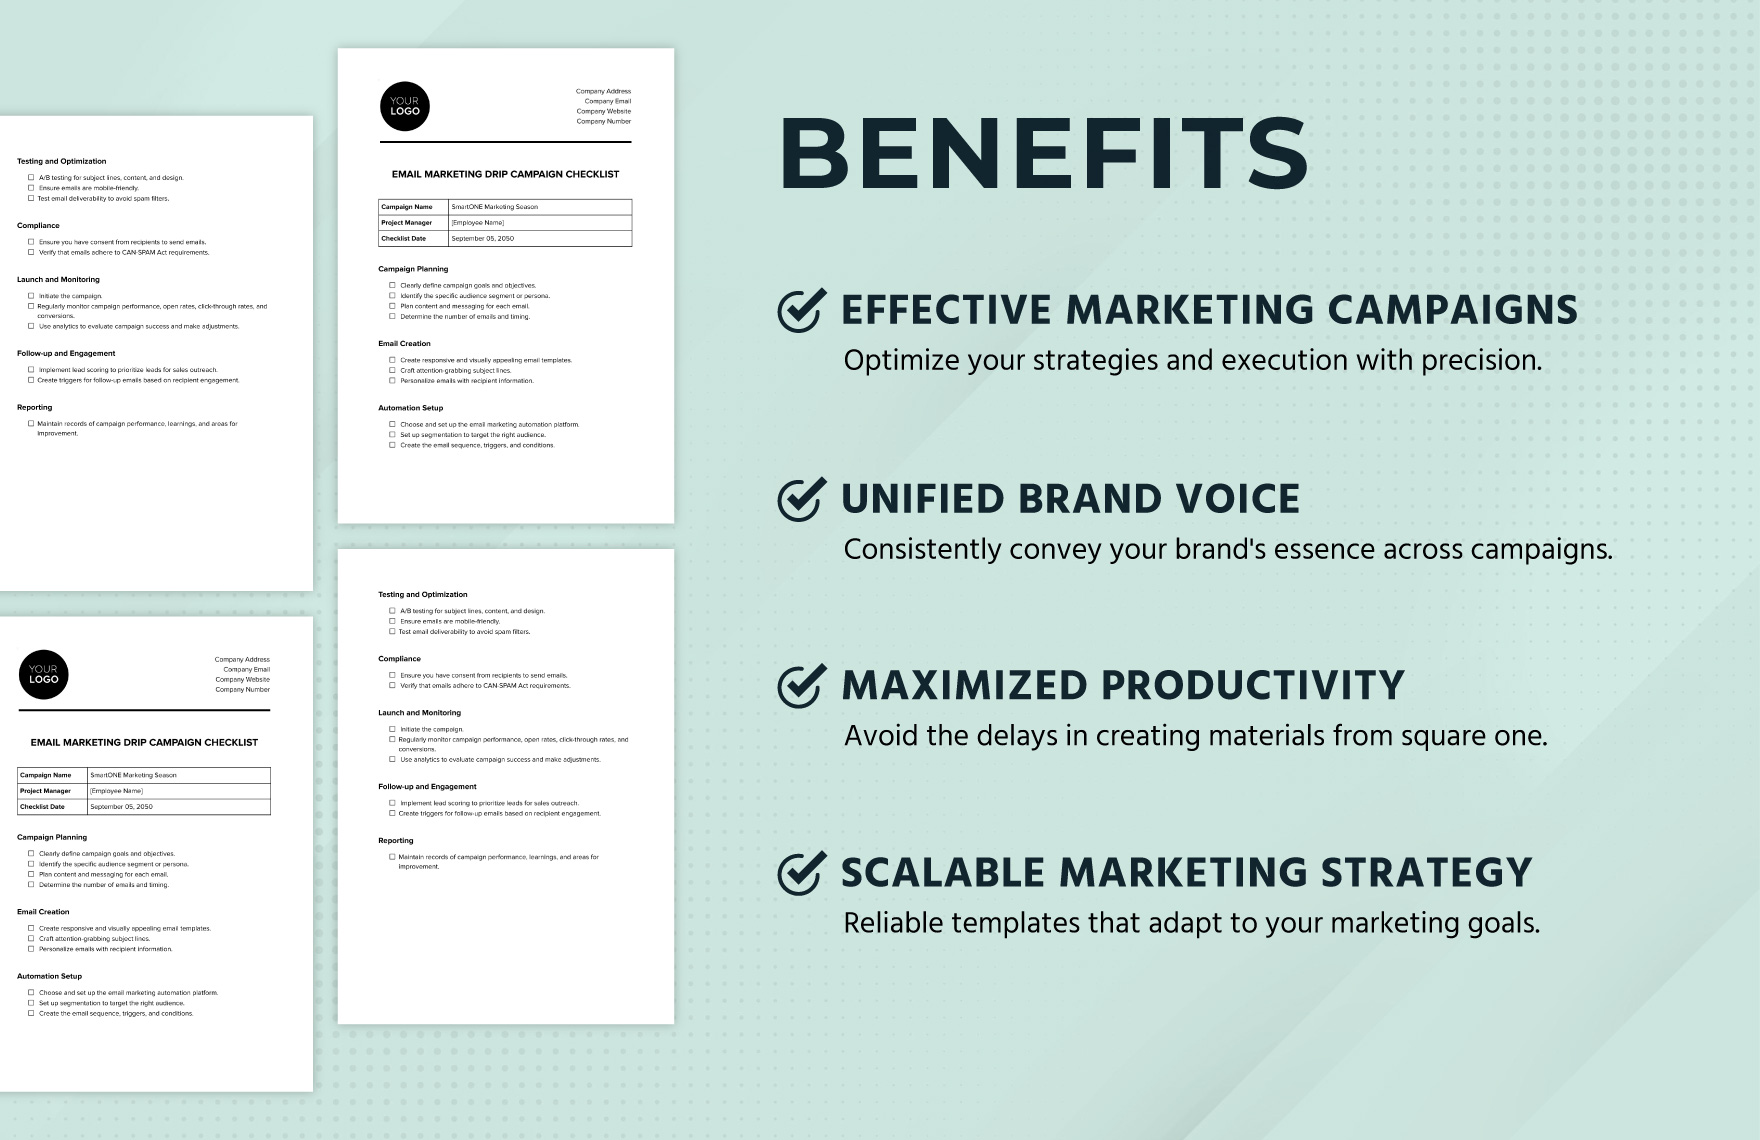 Email Marketing Drip Campaign Checklist Template